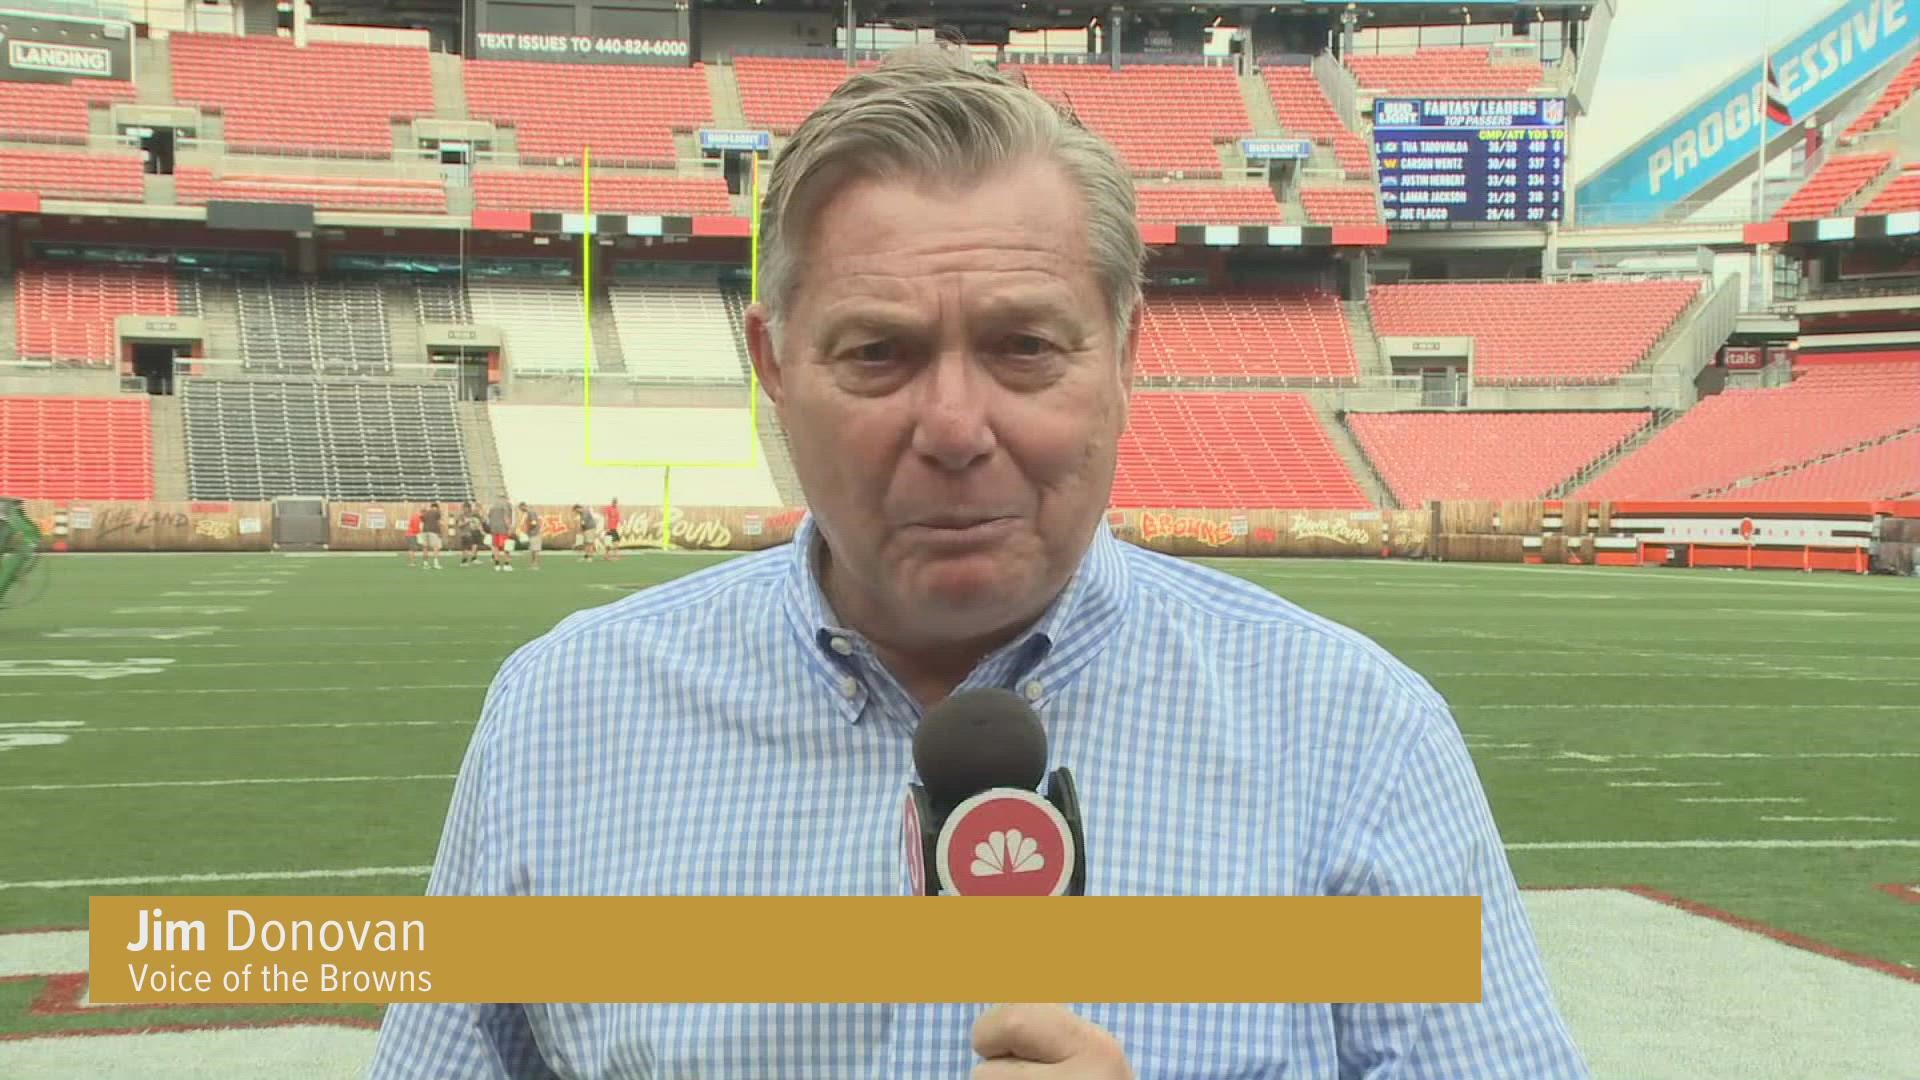 Voice of the Browns Jim Donovan breaks down the heartbreaking loss.